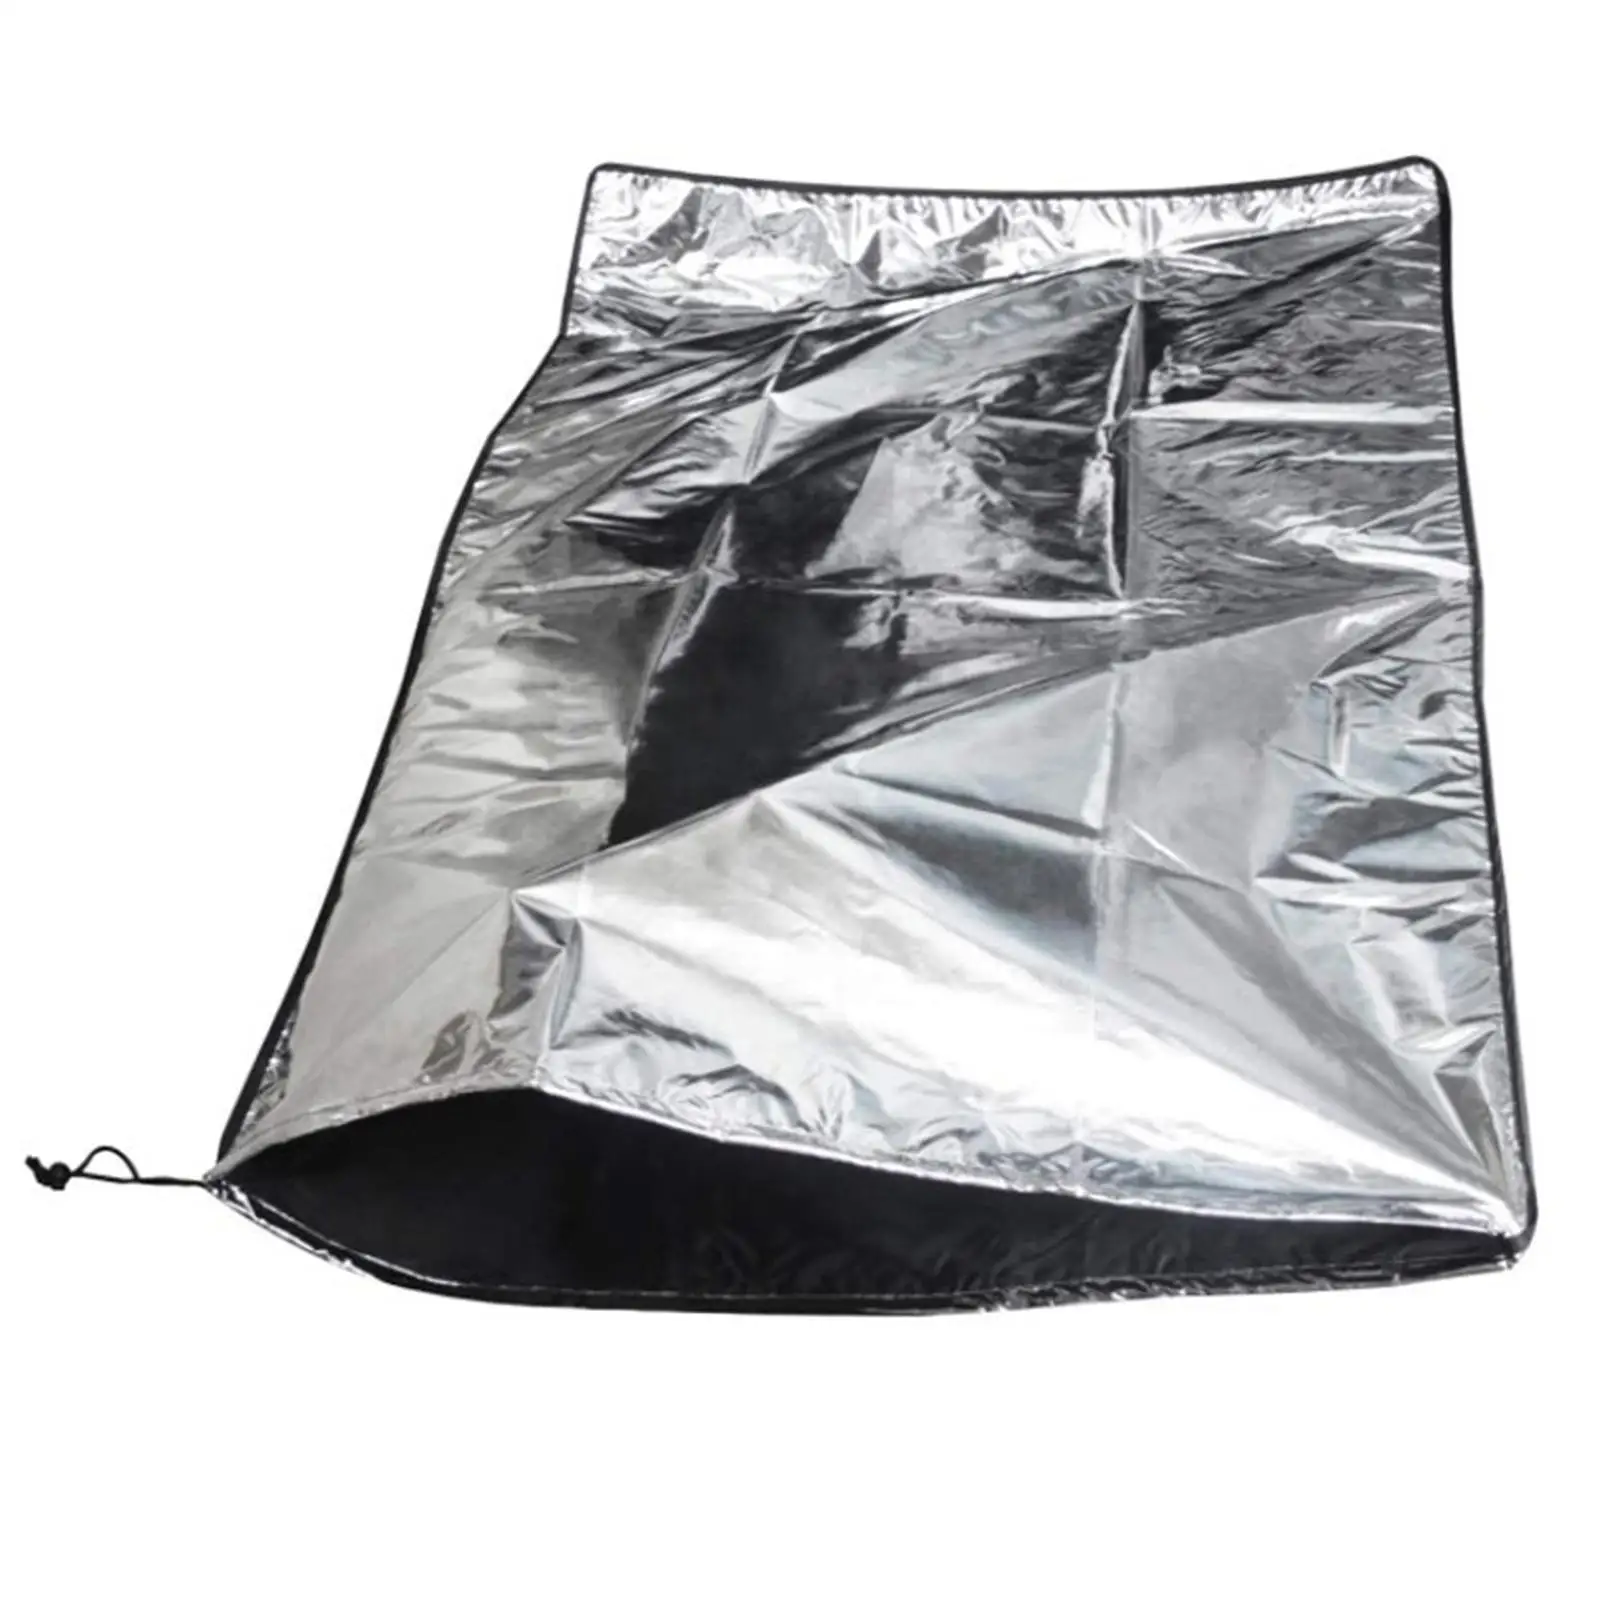 Astronomical Telescope Dust Cover Attachments Simple Using with Adjustable Drawstring Portable Lightweight Durable for Traveling